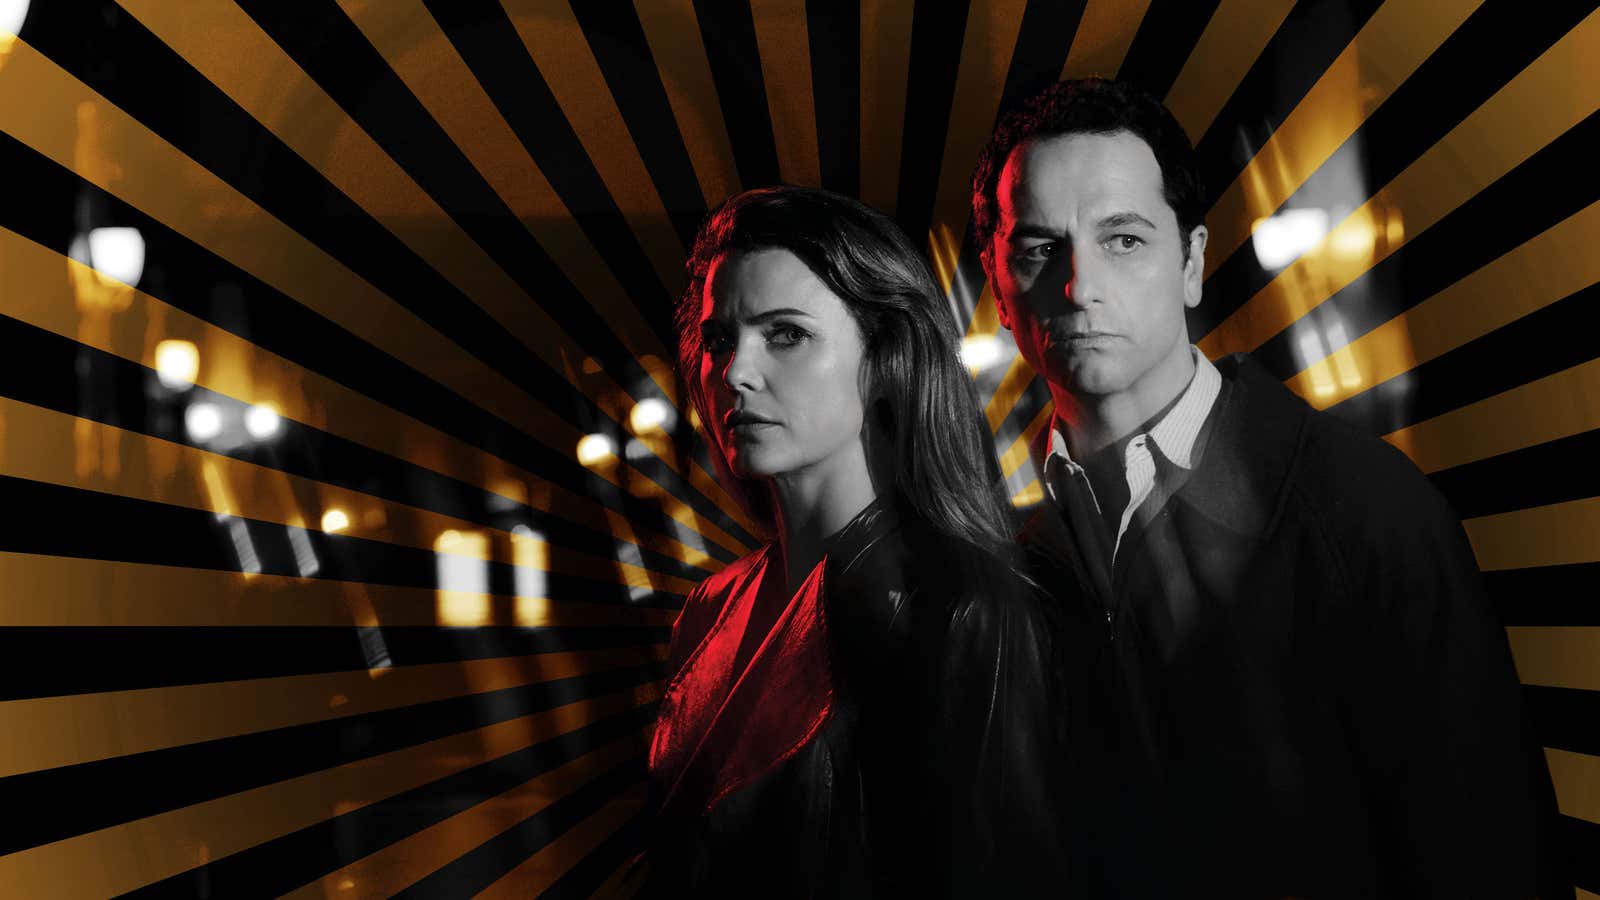 Keri Russell and Matthew Rhys play Philip and Elizabeth Jennings in The Americans.